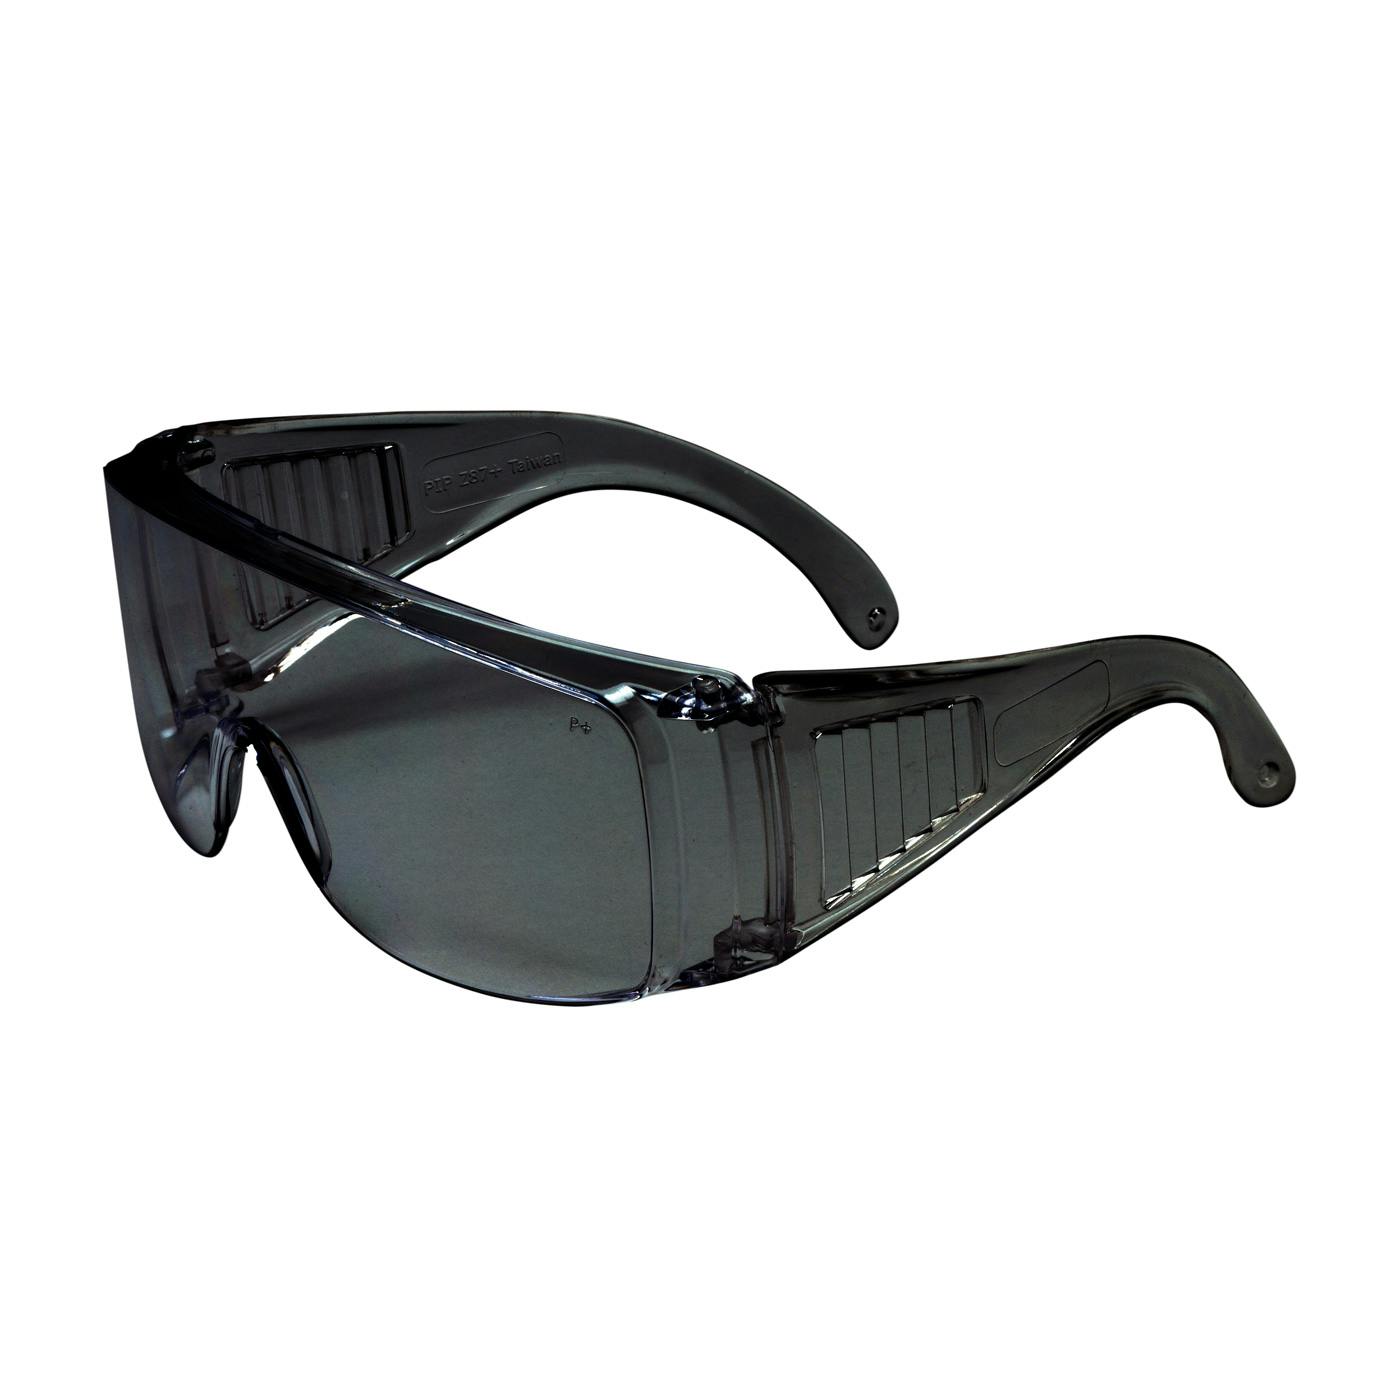 OTG Rimless Safety Glasses with Gray Temple, Gray Lens and Anti-Scratch Coating, Gray (250-99-0901) - OS_0